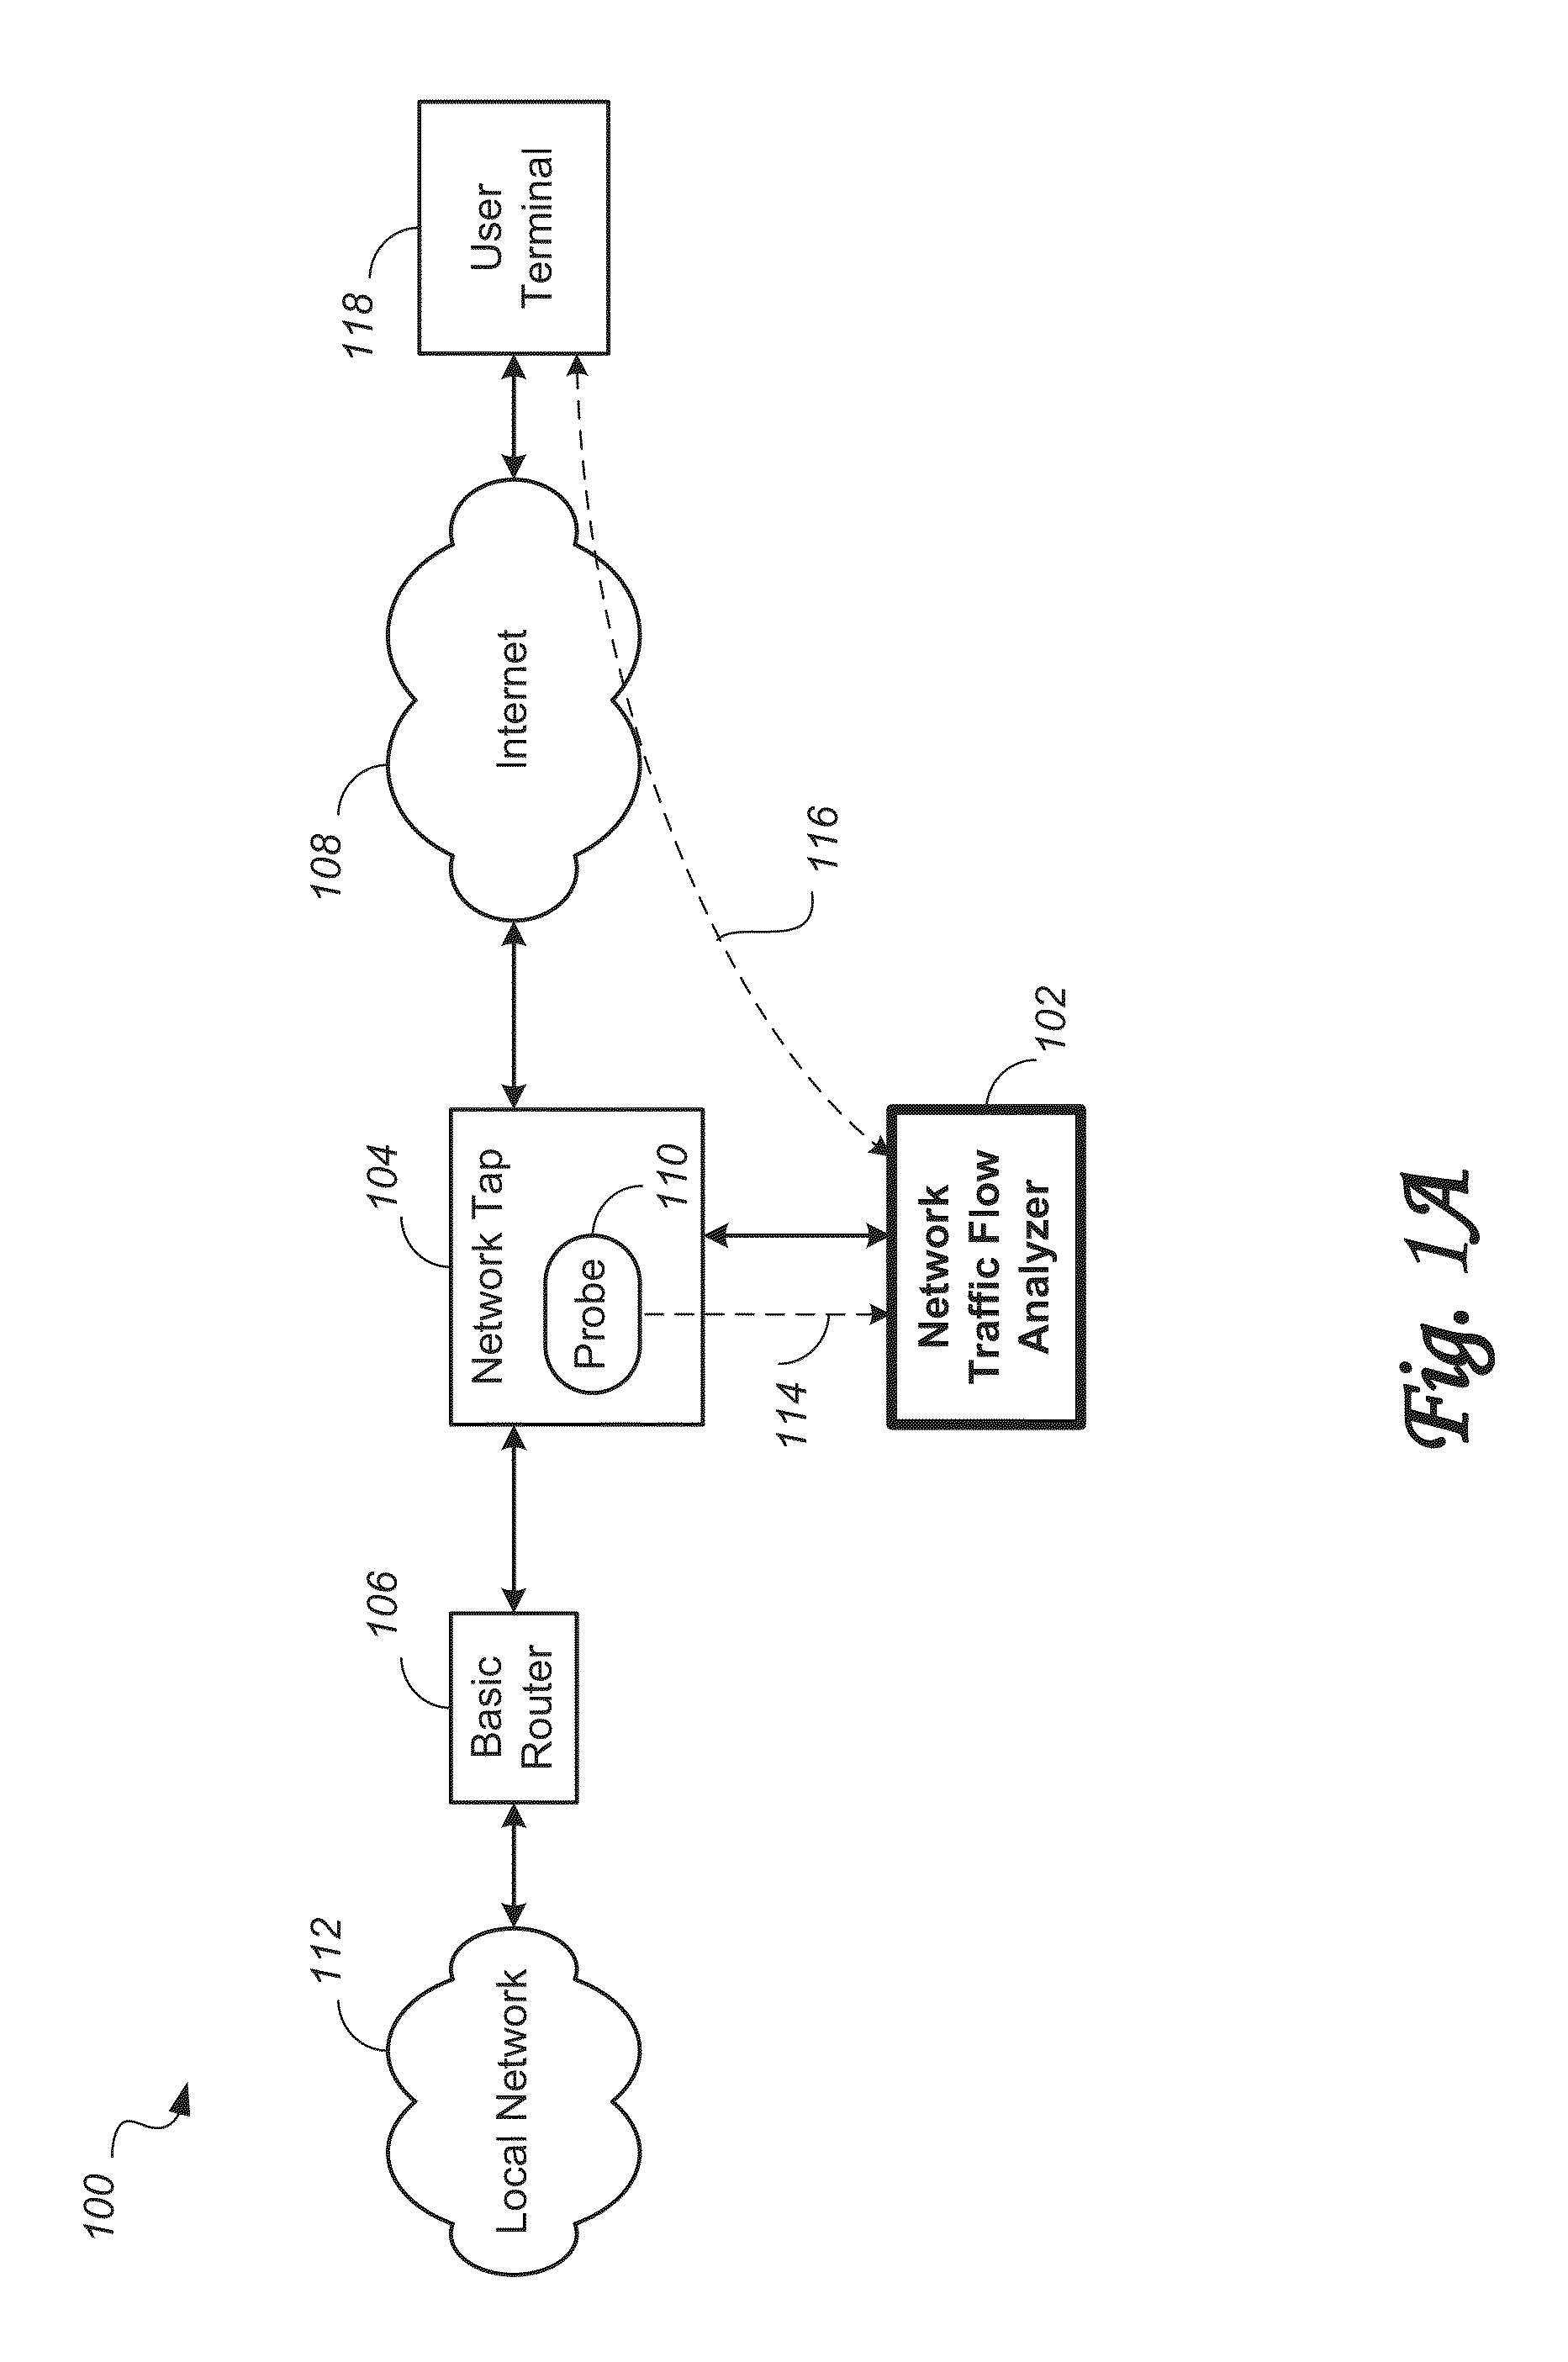 Method and system for monitoring and analysis of network traffic flows